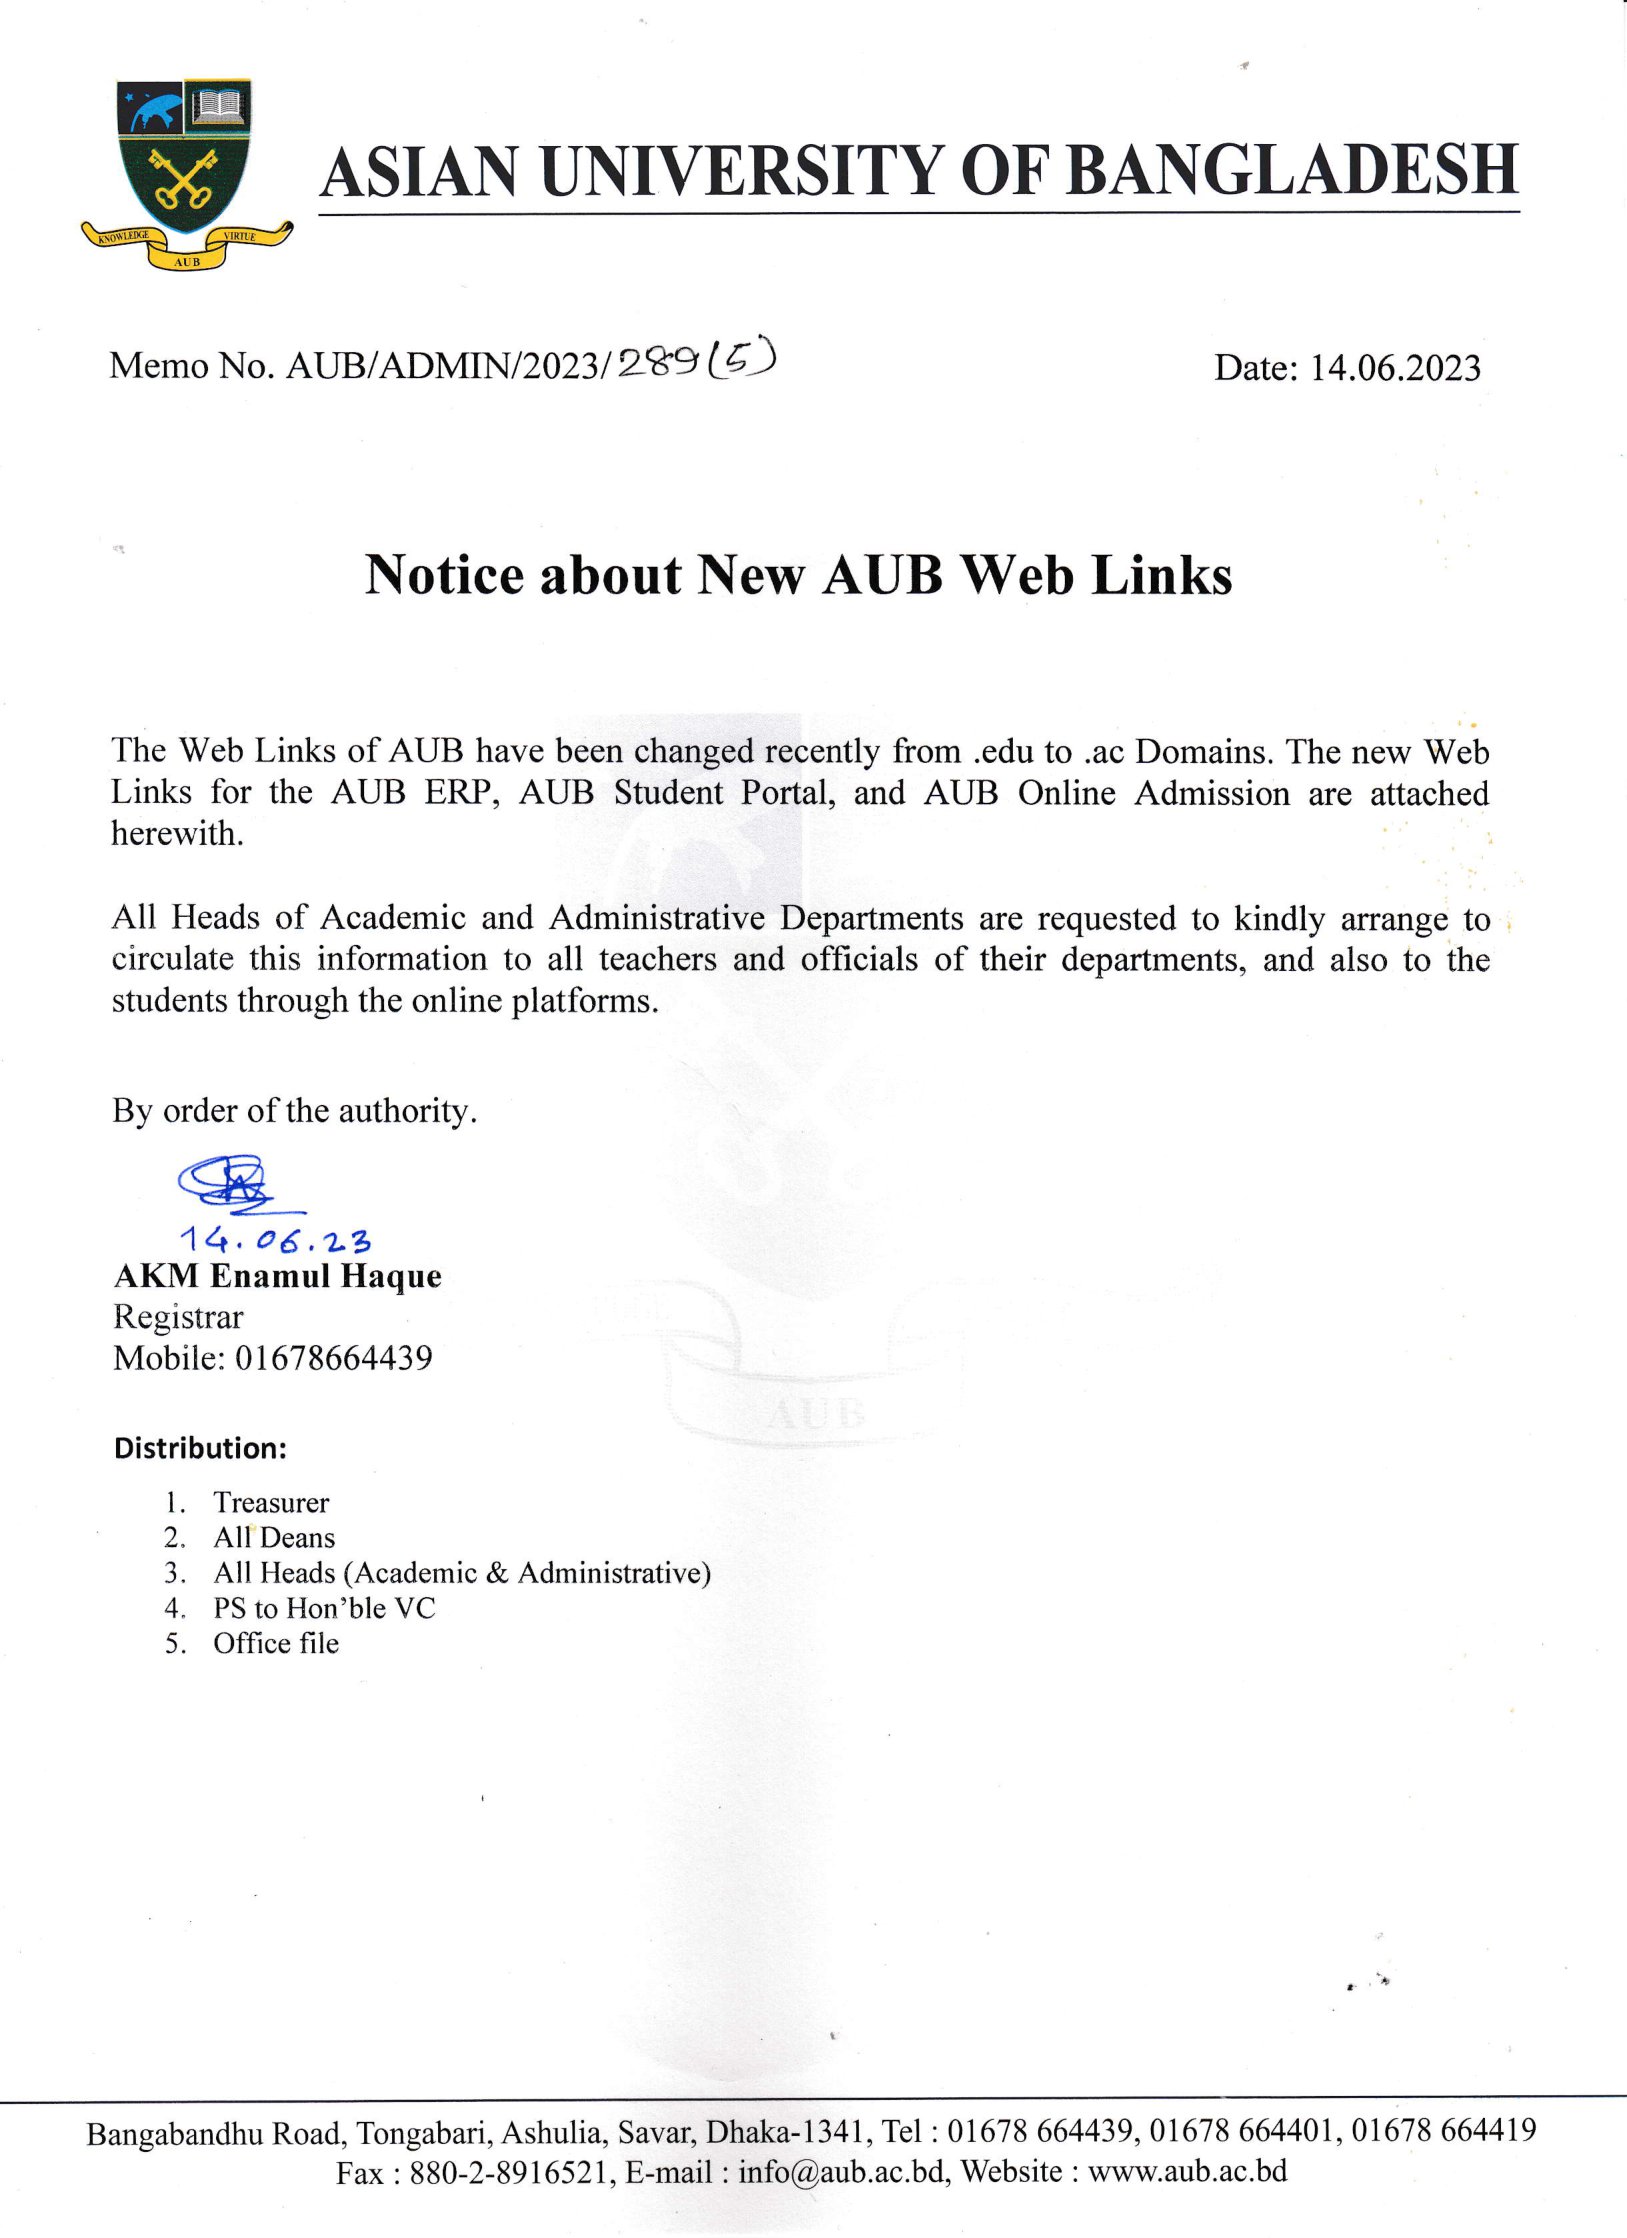 NOTICE ABOUT NEW AUB WEB LINKS